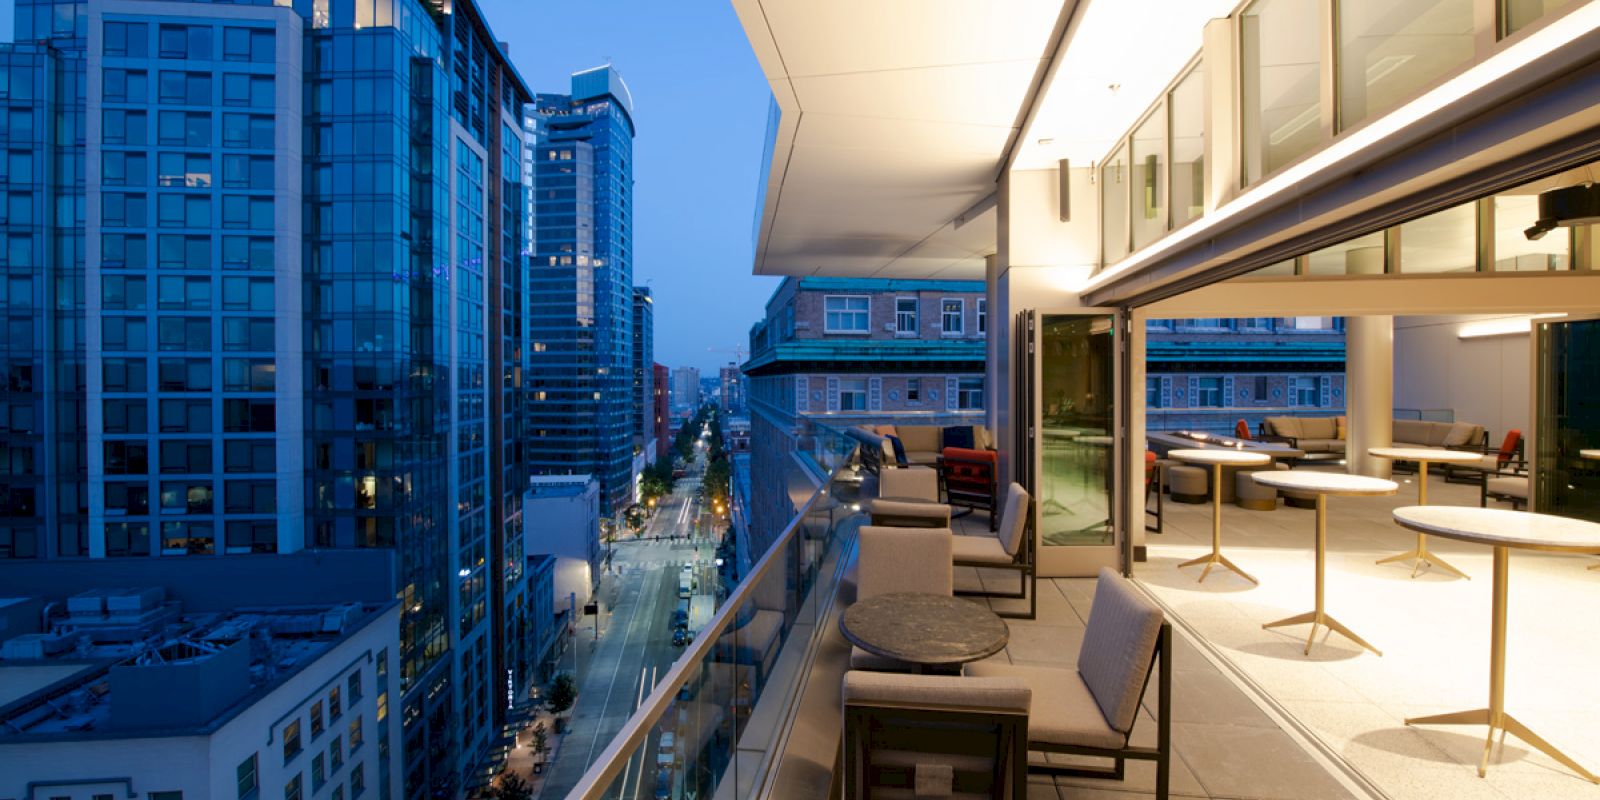 A modern cityscape viewed from a rooftop patio with tables and chairs, overlooking buildings and streets illuminated in the evening.